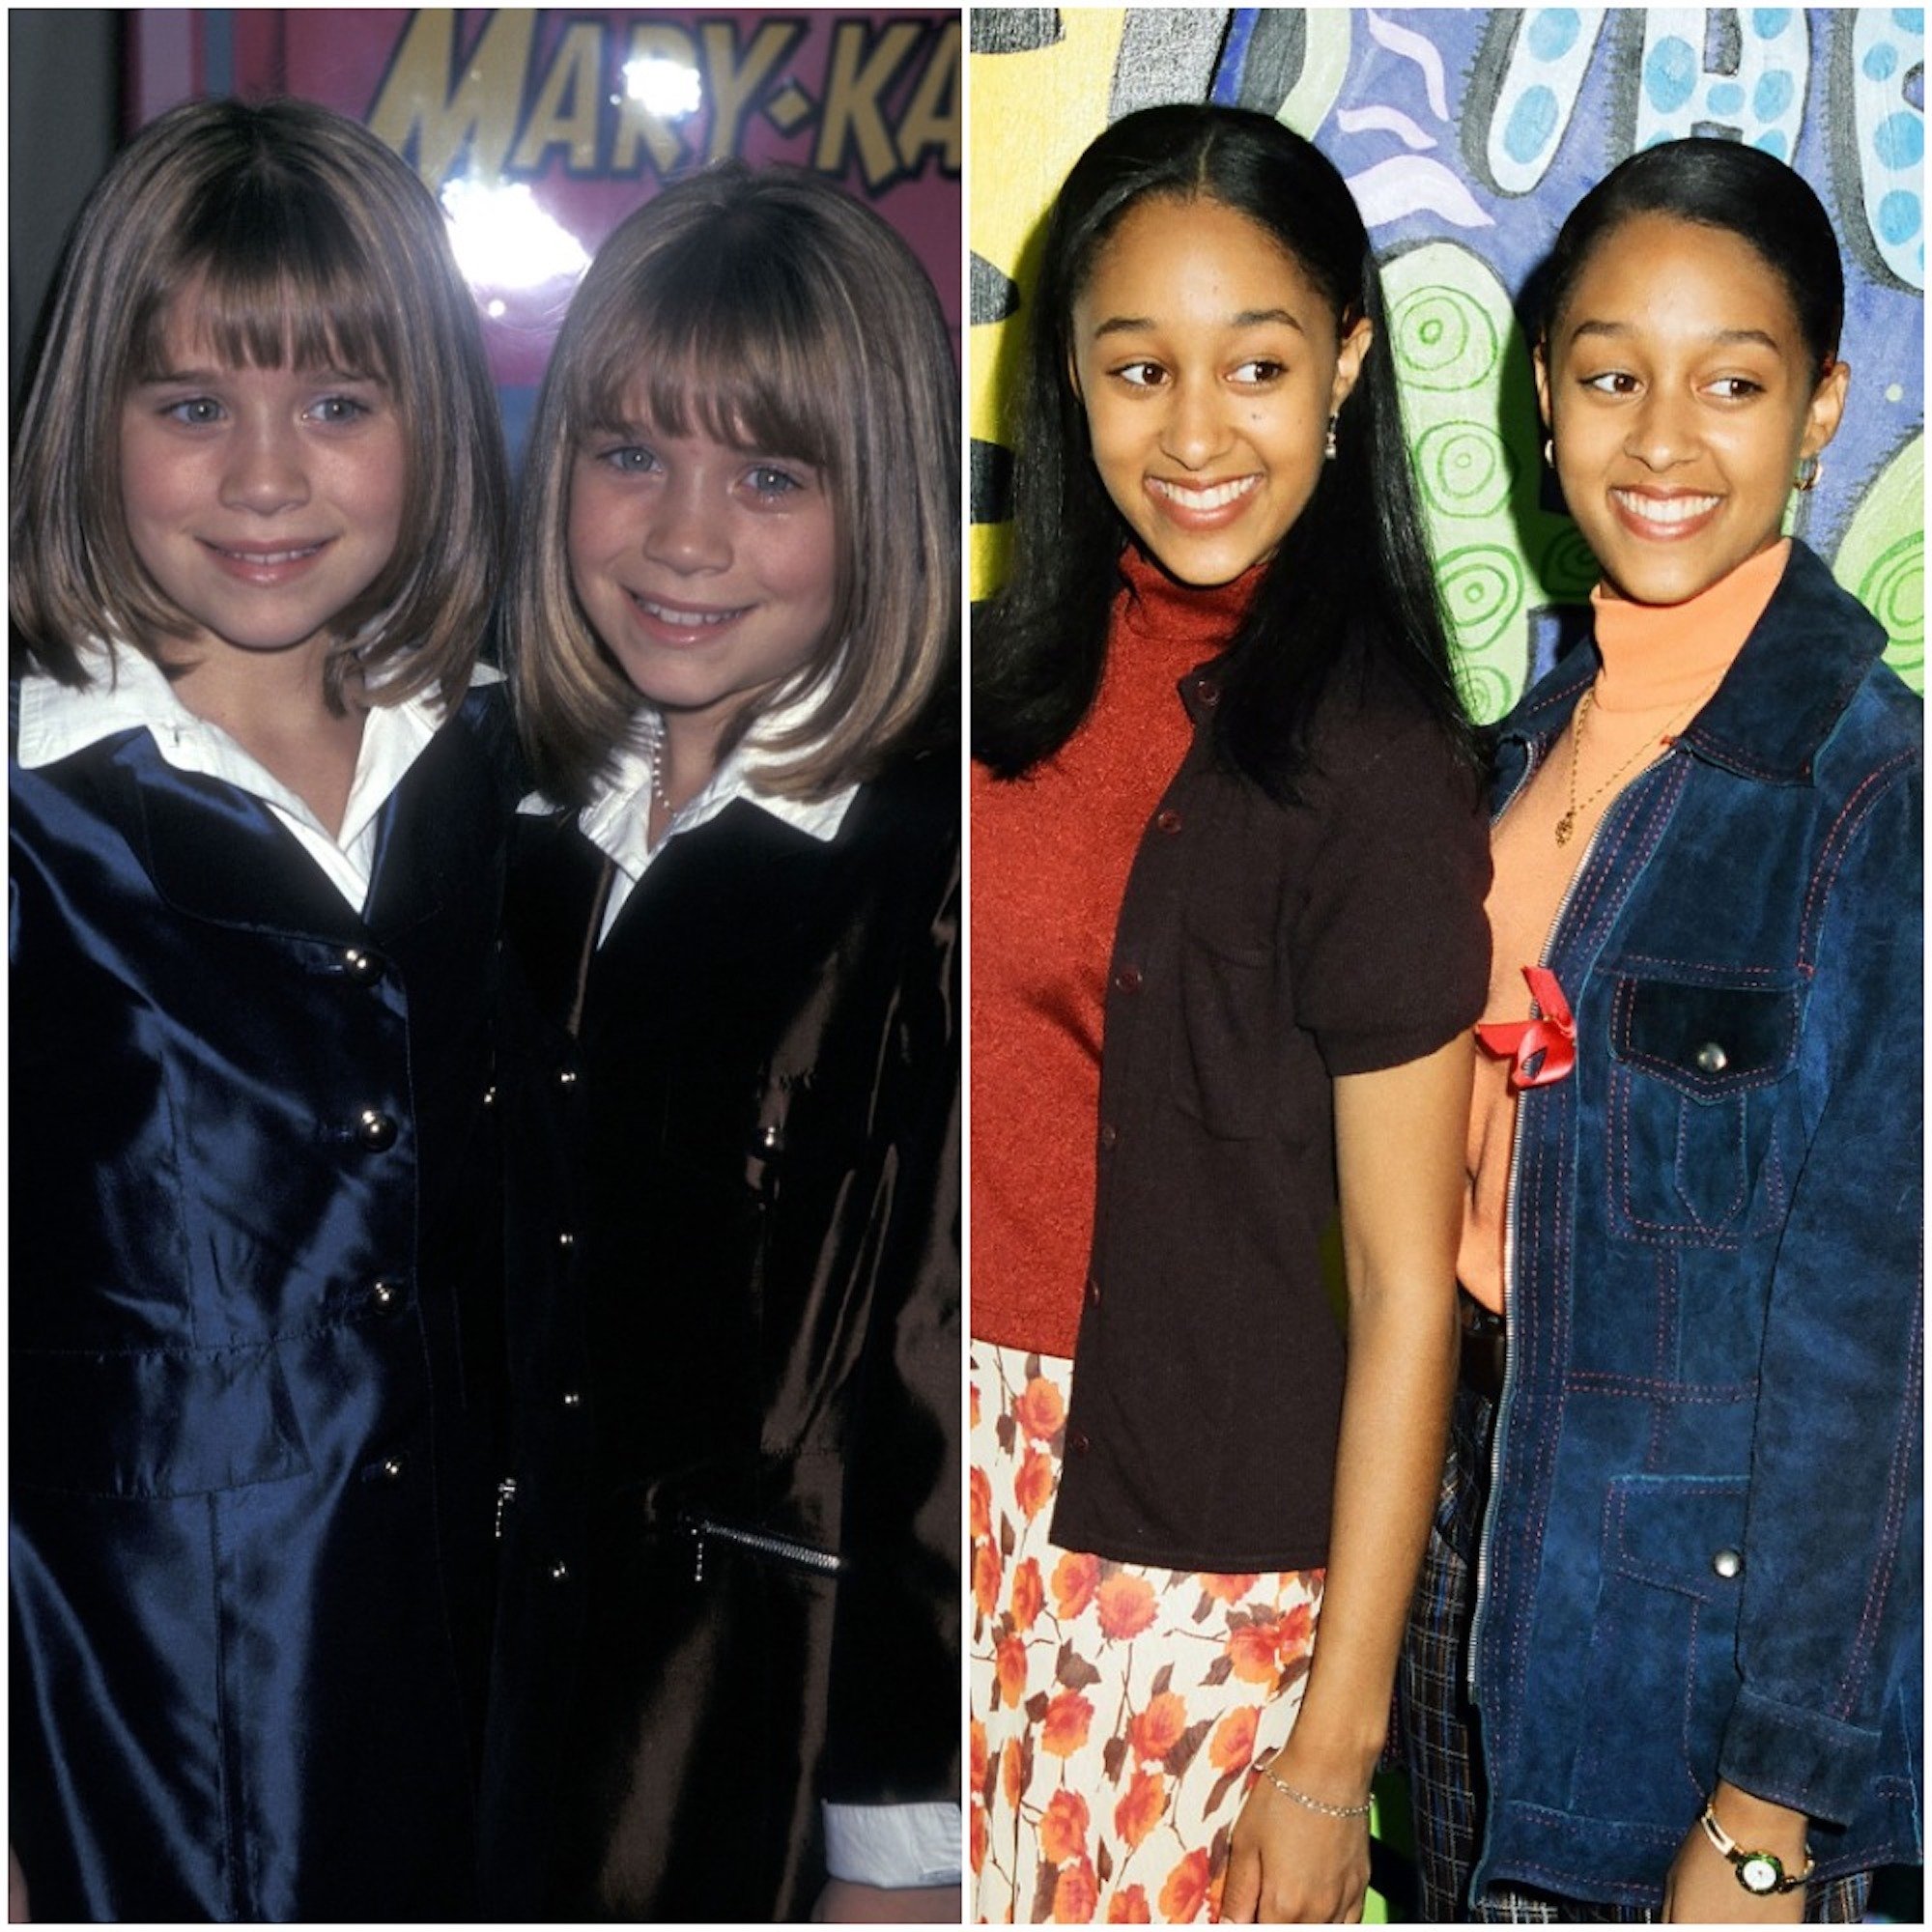 Mary-Kate and Ashley Olsen and Tia and Tamera Mowry